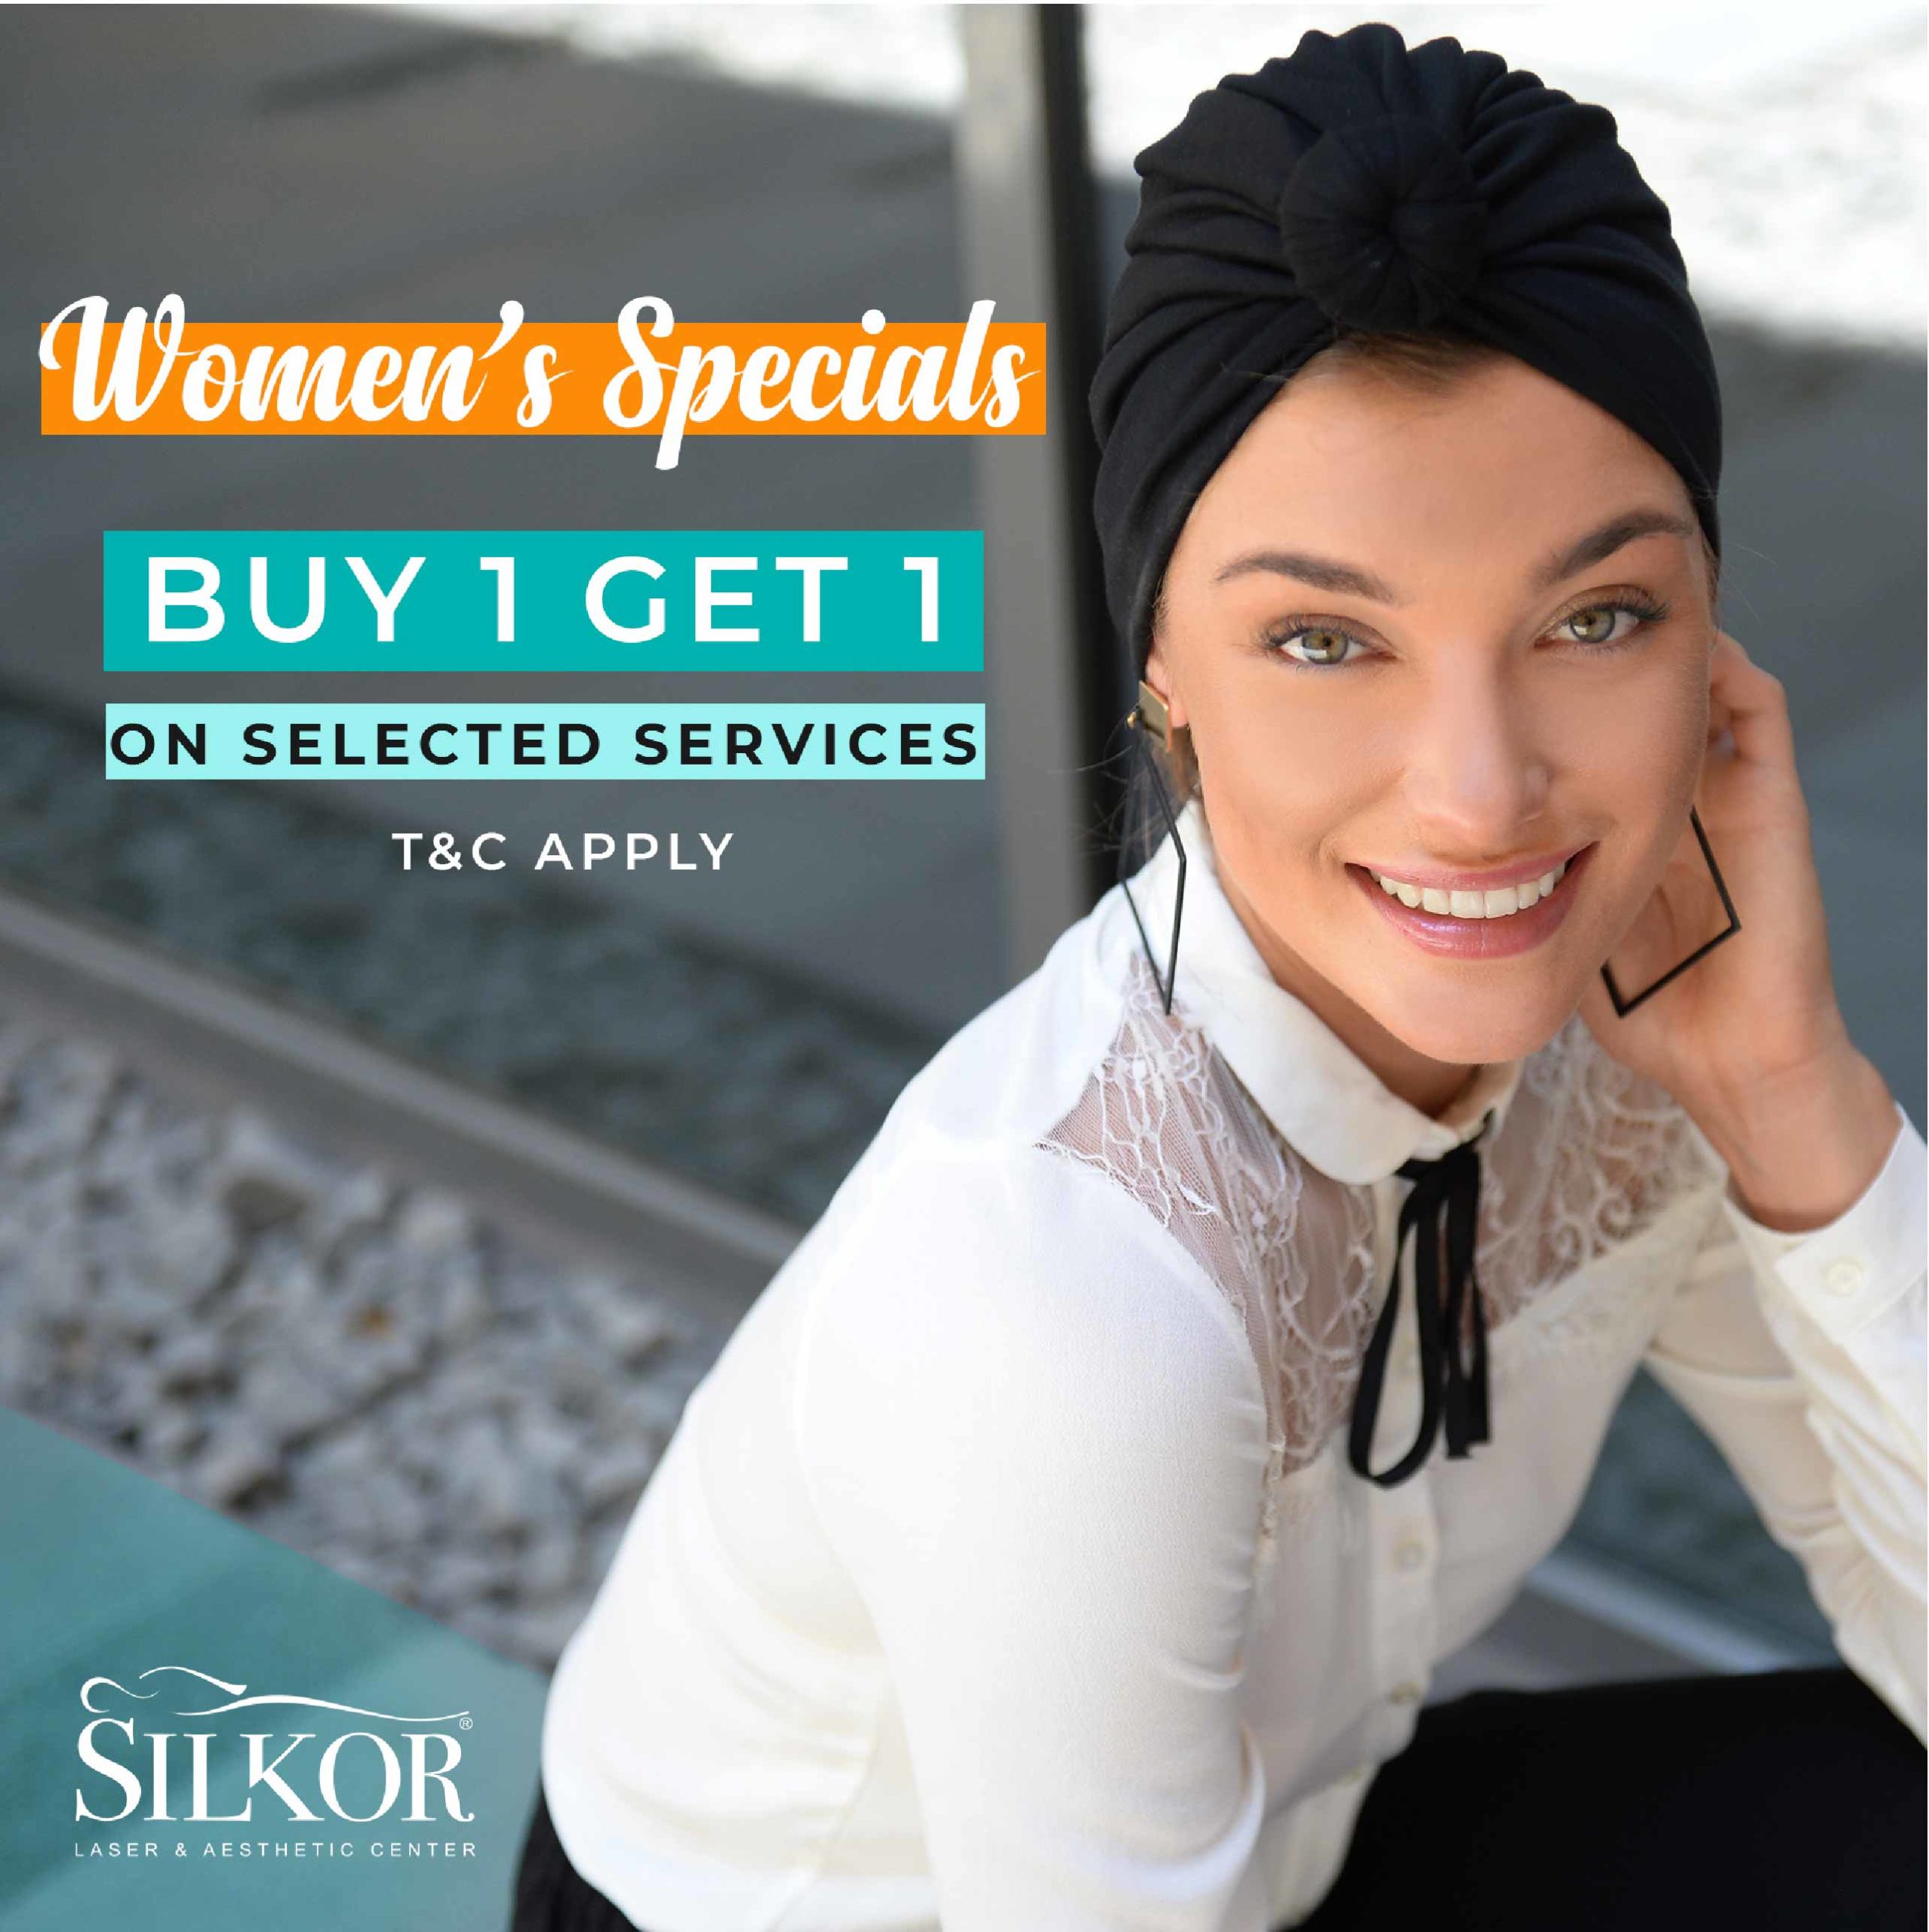 Silkor - special offer - skin center - beauty clinic - facials - skin care - Hydrafcial - Dubai - Abu Dhabi - Mesotherapy - facial Care - Mothers Day - Womens Day